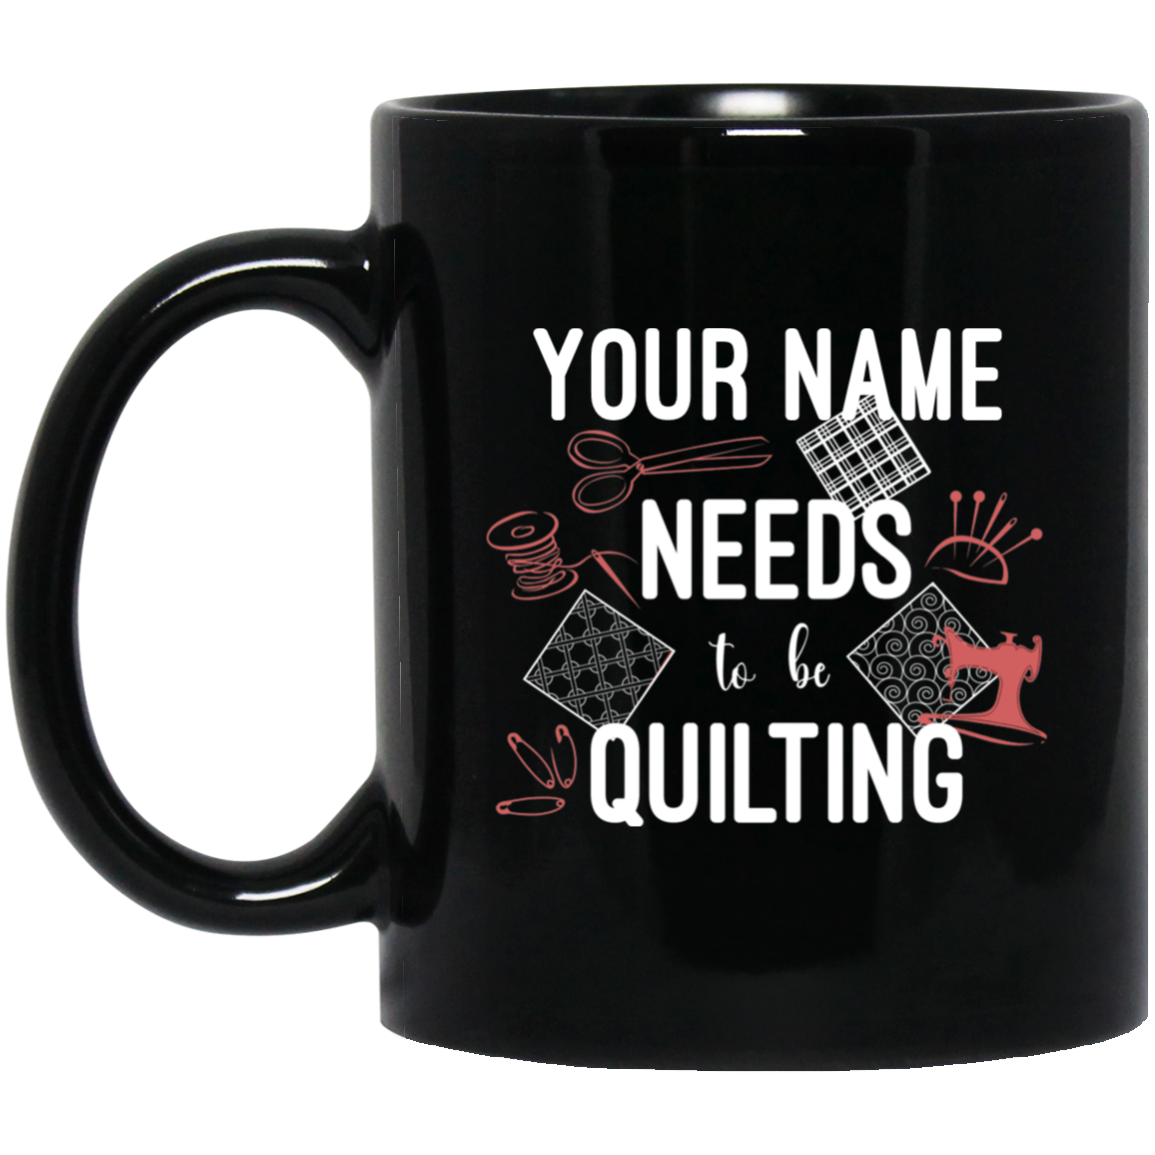 Needs to be Quilting - Personalized Black Mugs